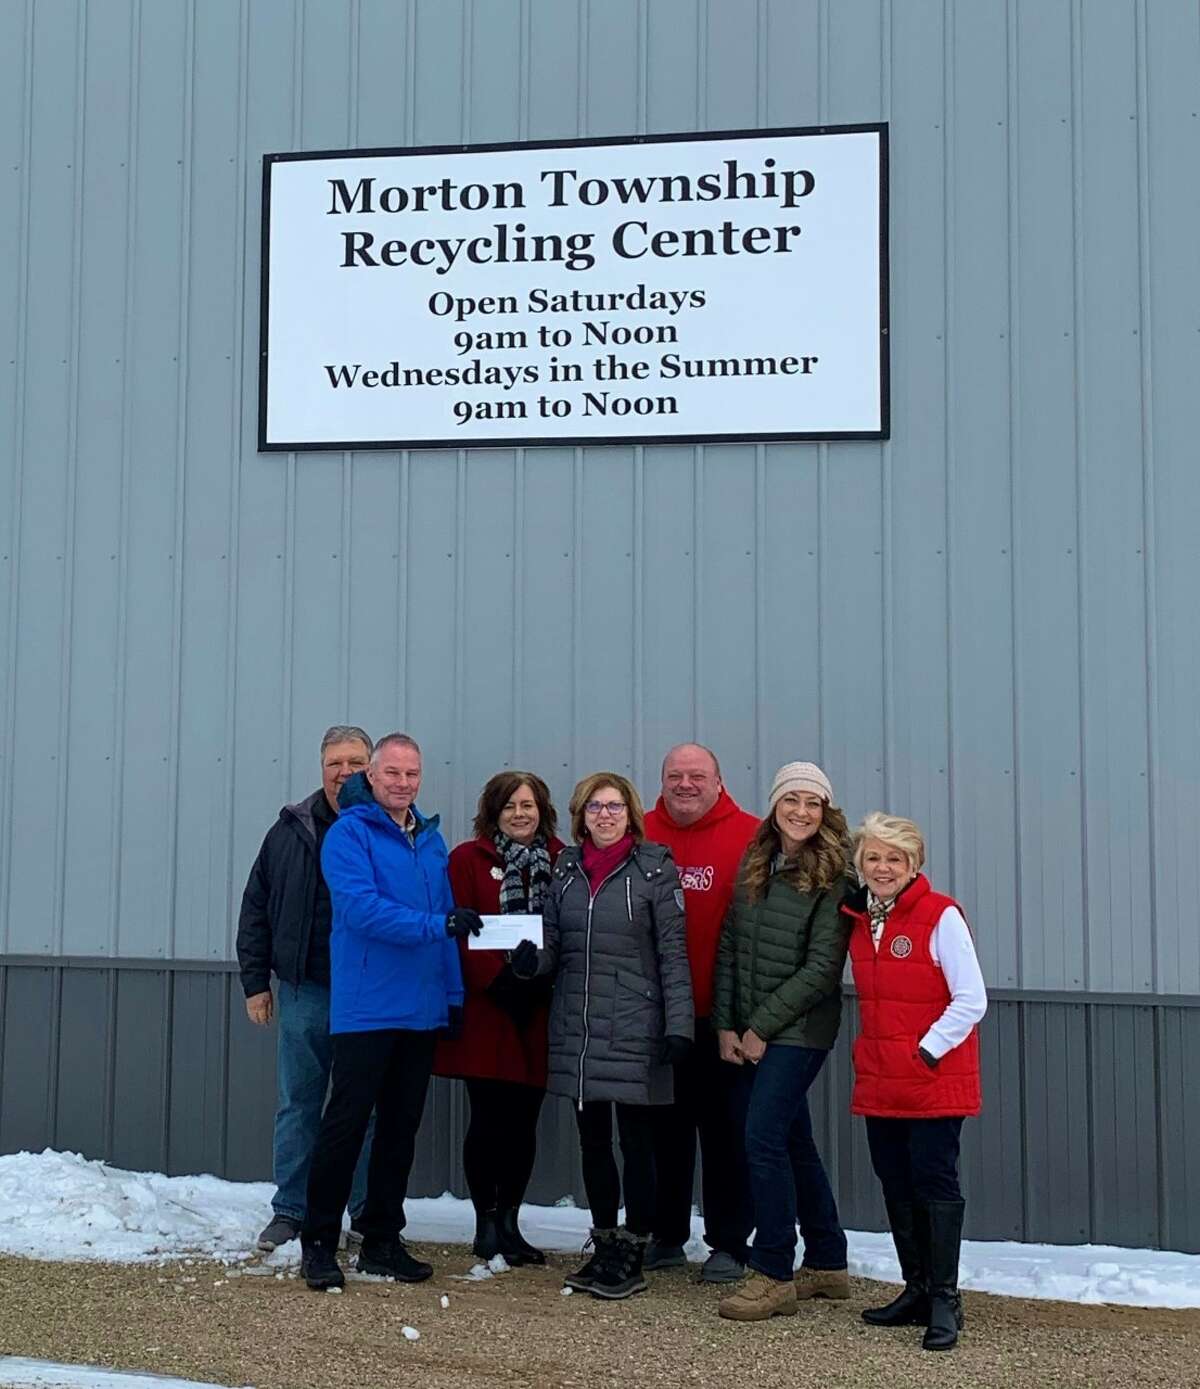 The Morton Township recycling Center has received a $10,000 donation from Blue Triton Brands, Inc.